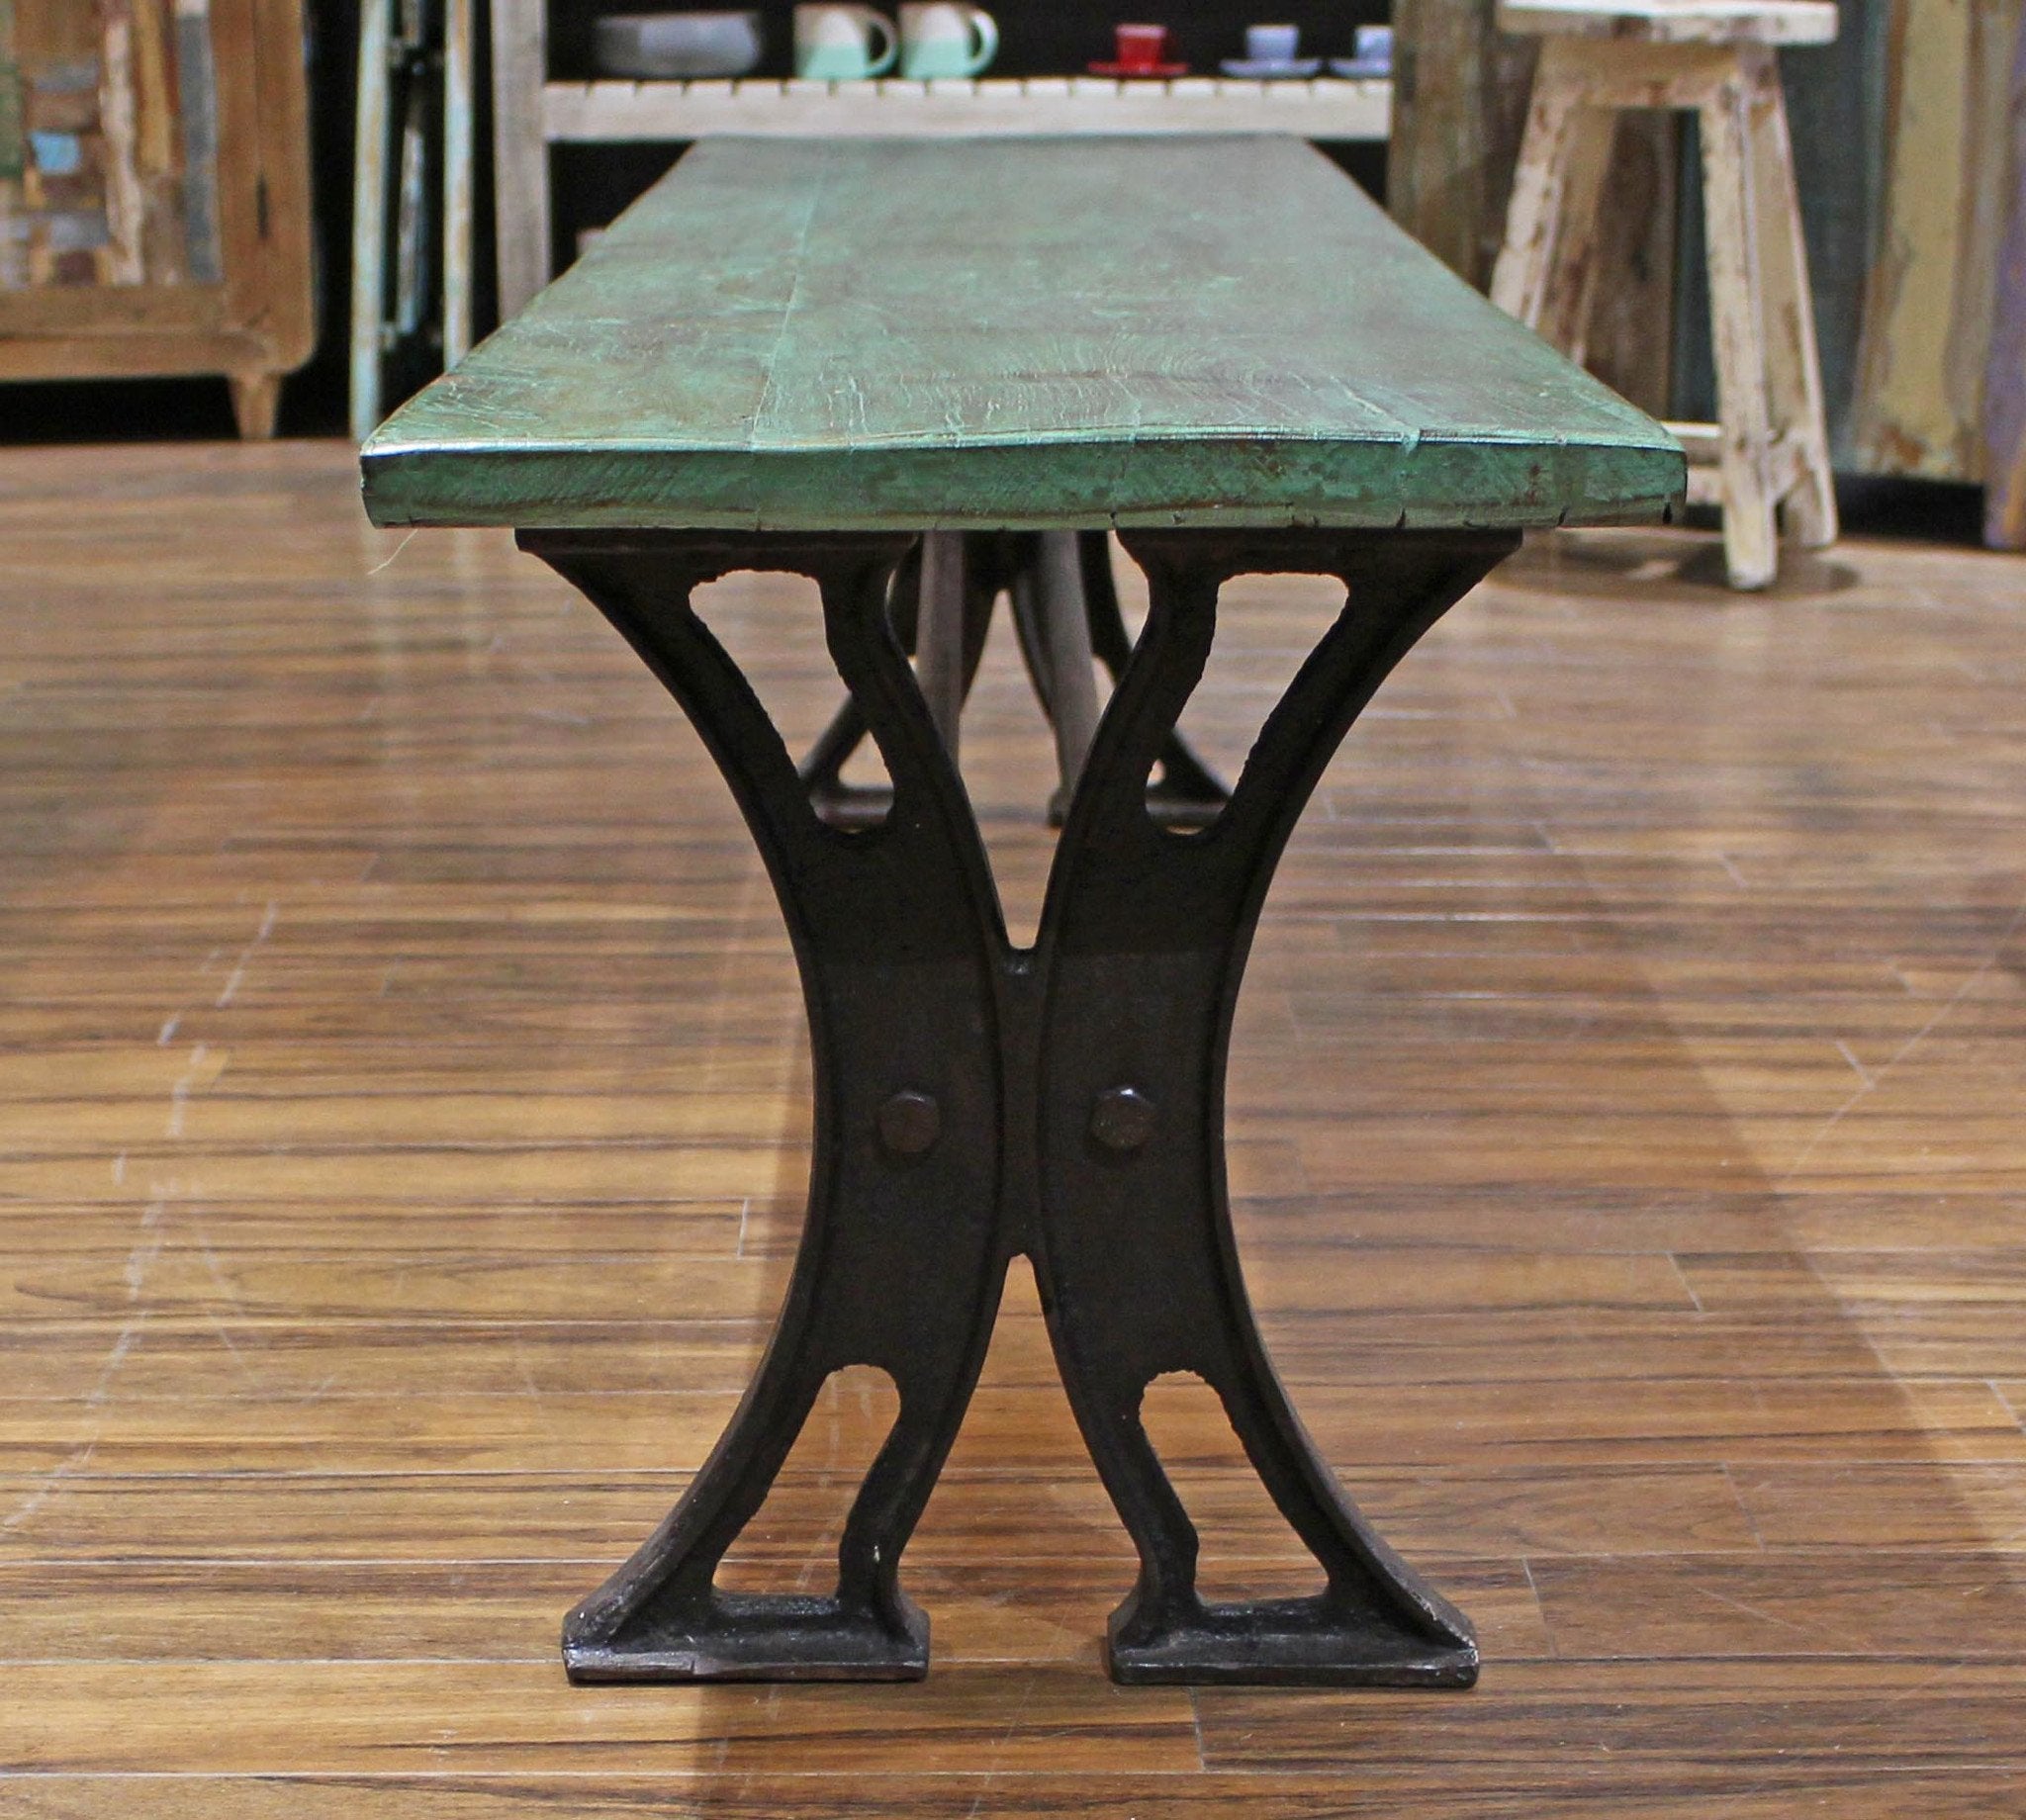 Bench Cast Iron & Reclaimed Teak close up of legs with Green patina